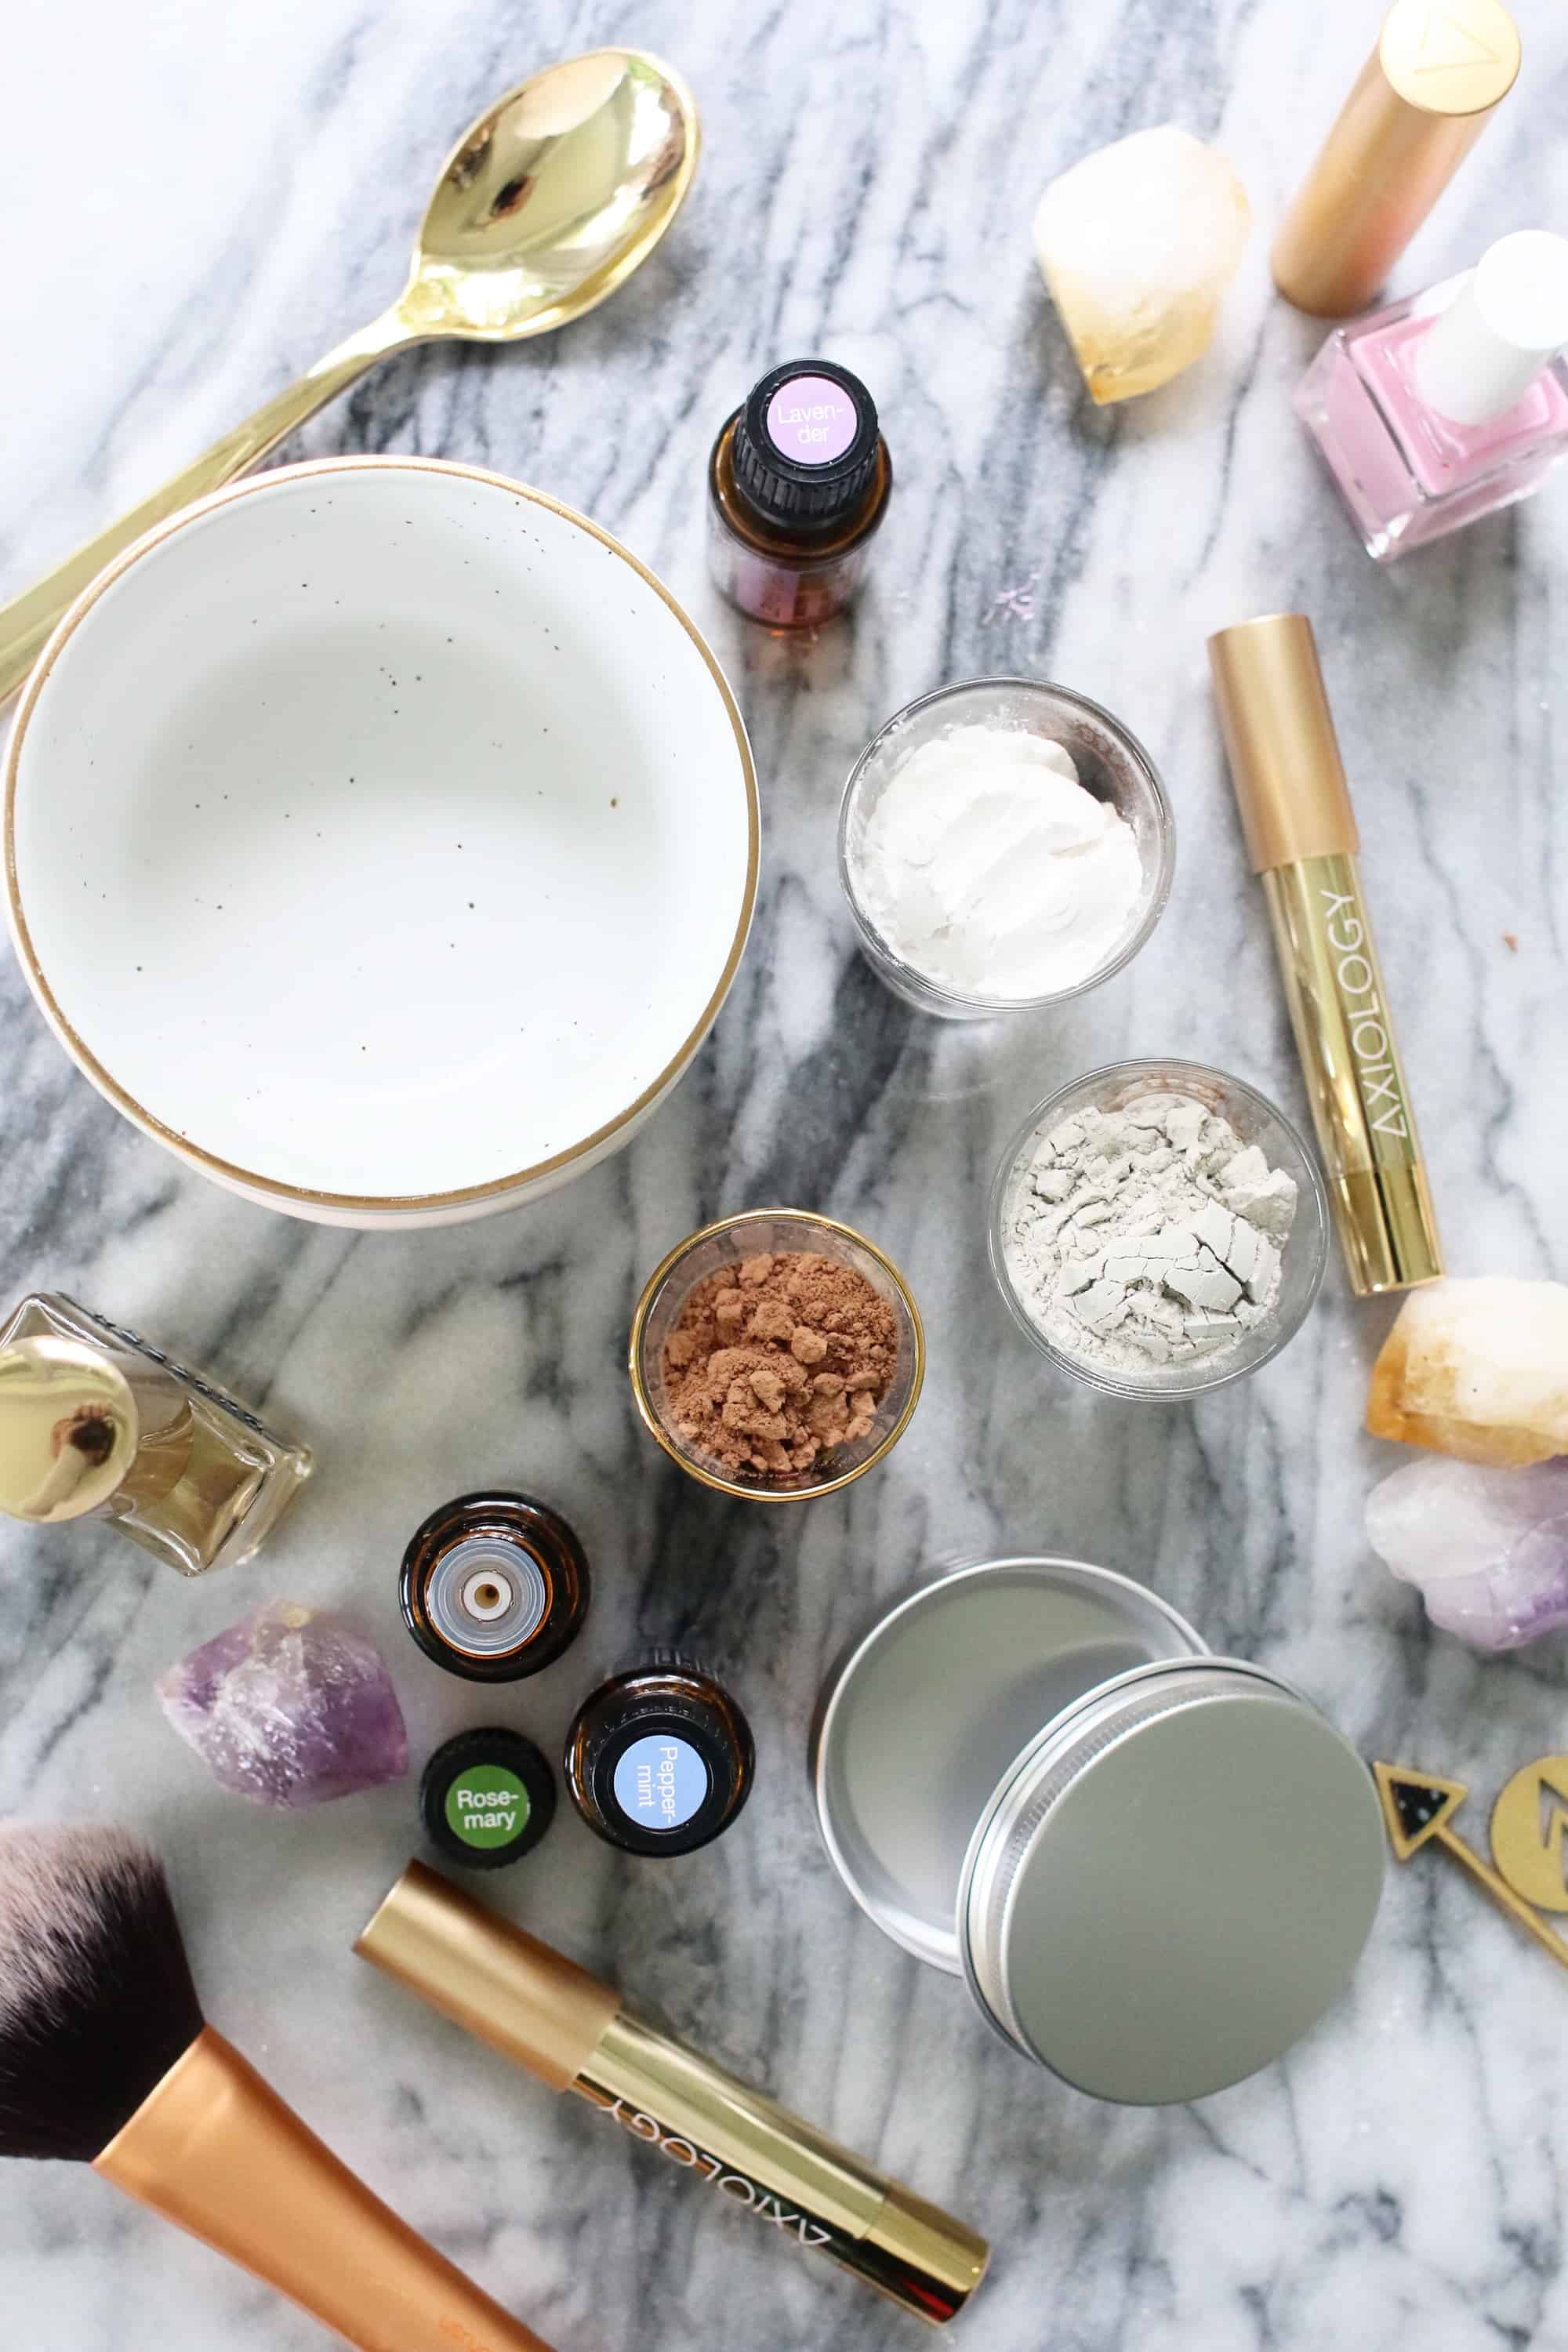 Make Your Own Nontoxic Dry Shampoo! - A Beautiful Mess